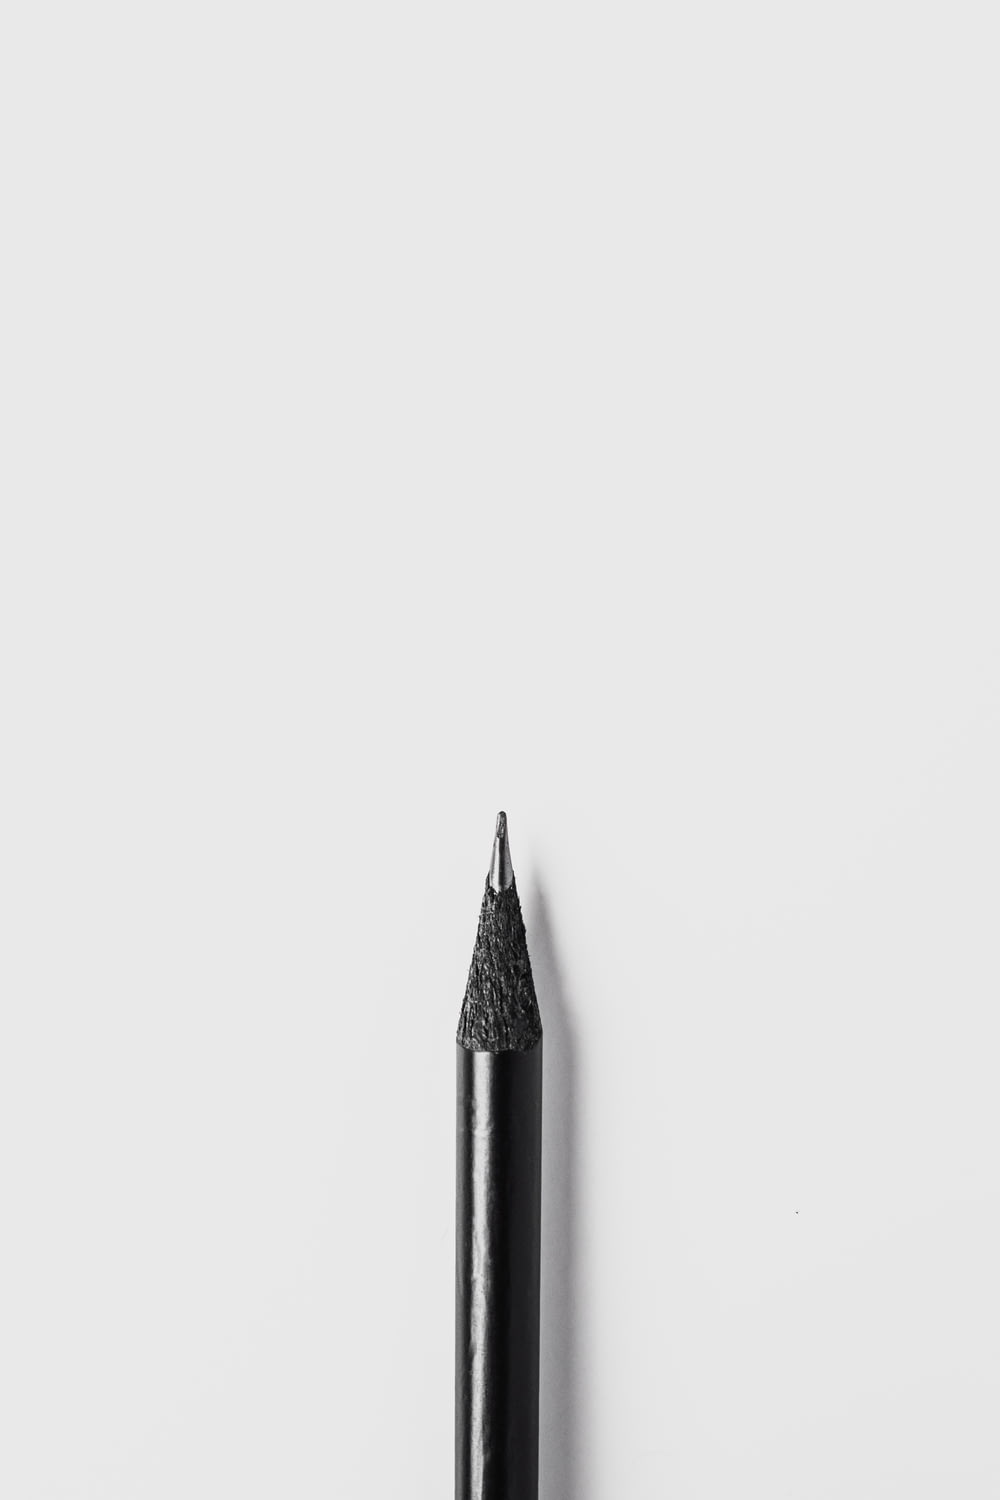 black pencil on white surface